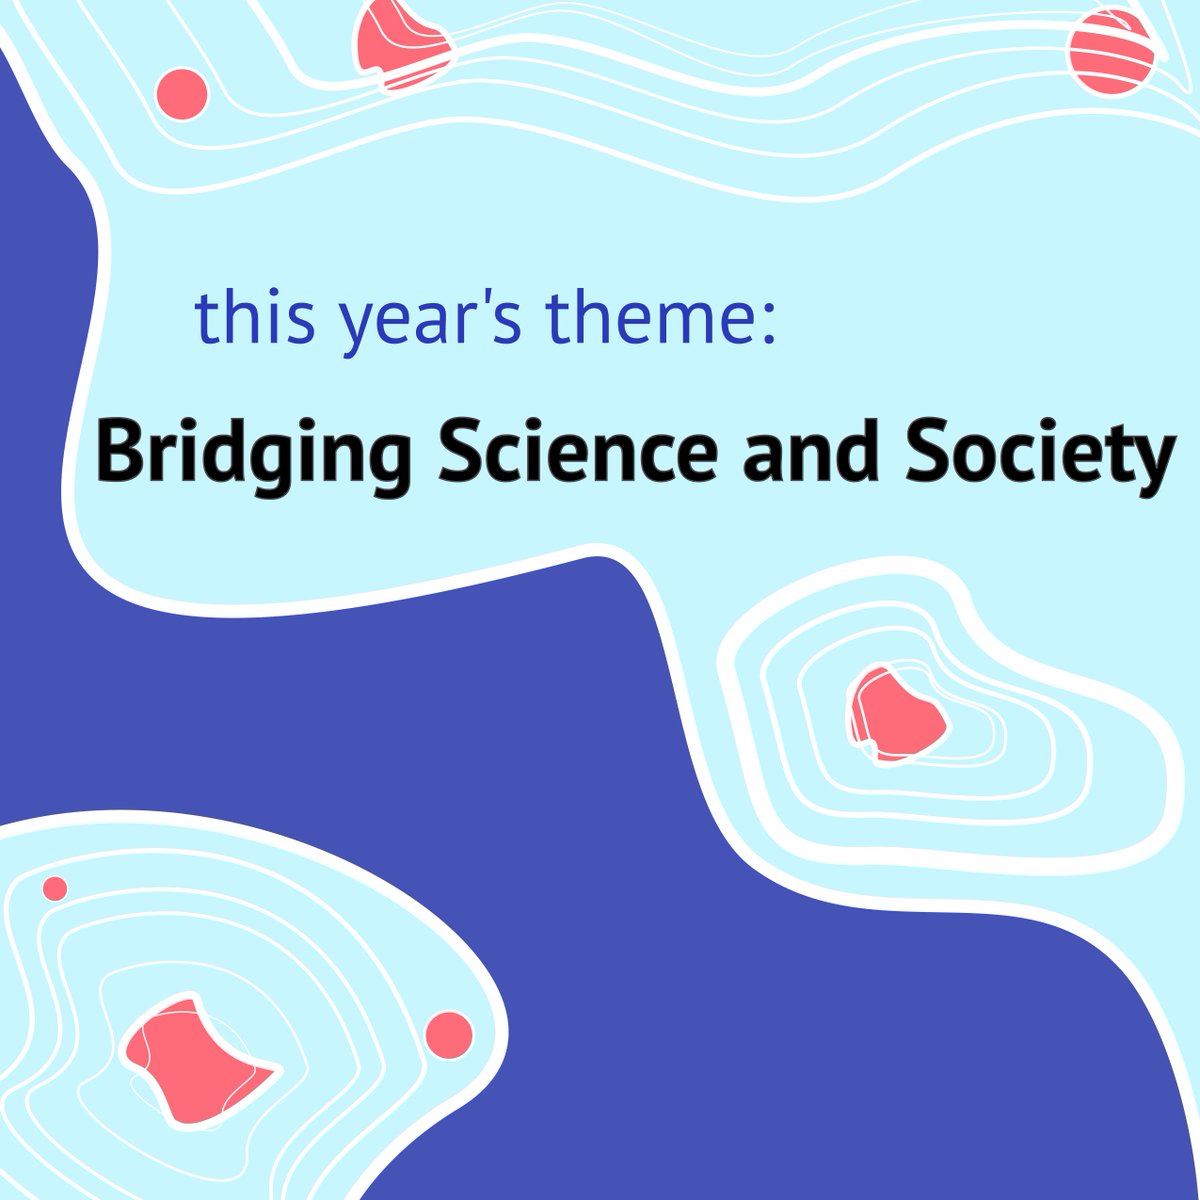 More soon about the upcoming deadline to work with the most passionate science communicators in the world this summer in Boston (apply if you haven’t yet: bit.ly/3uMJGv2)! In the meantime, we are pleased to announce our theme: Bridging Science and Society.